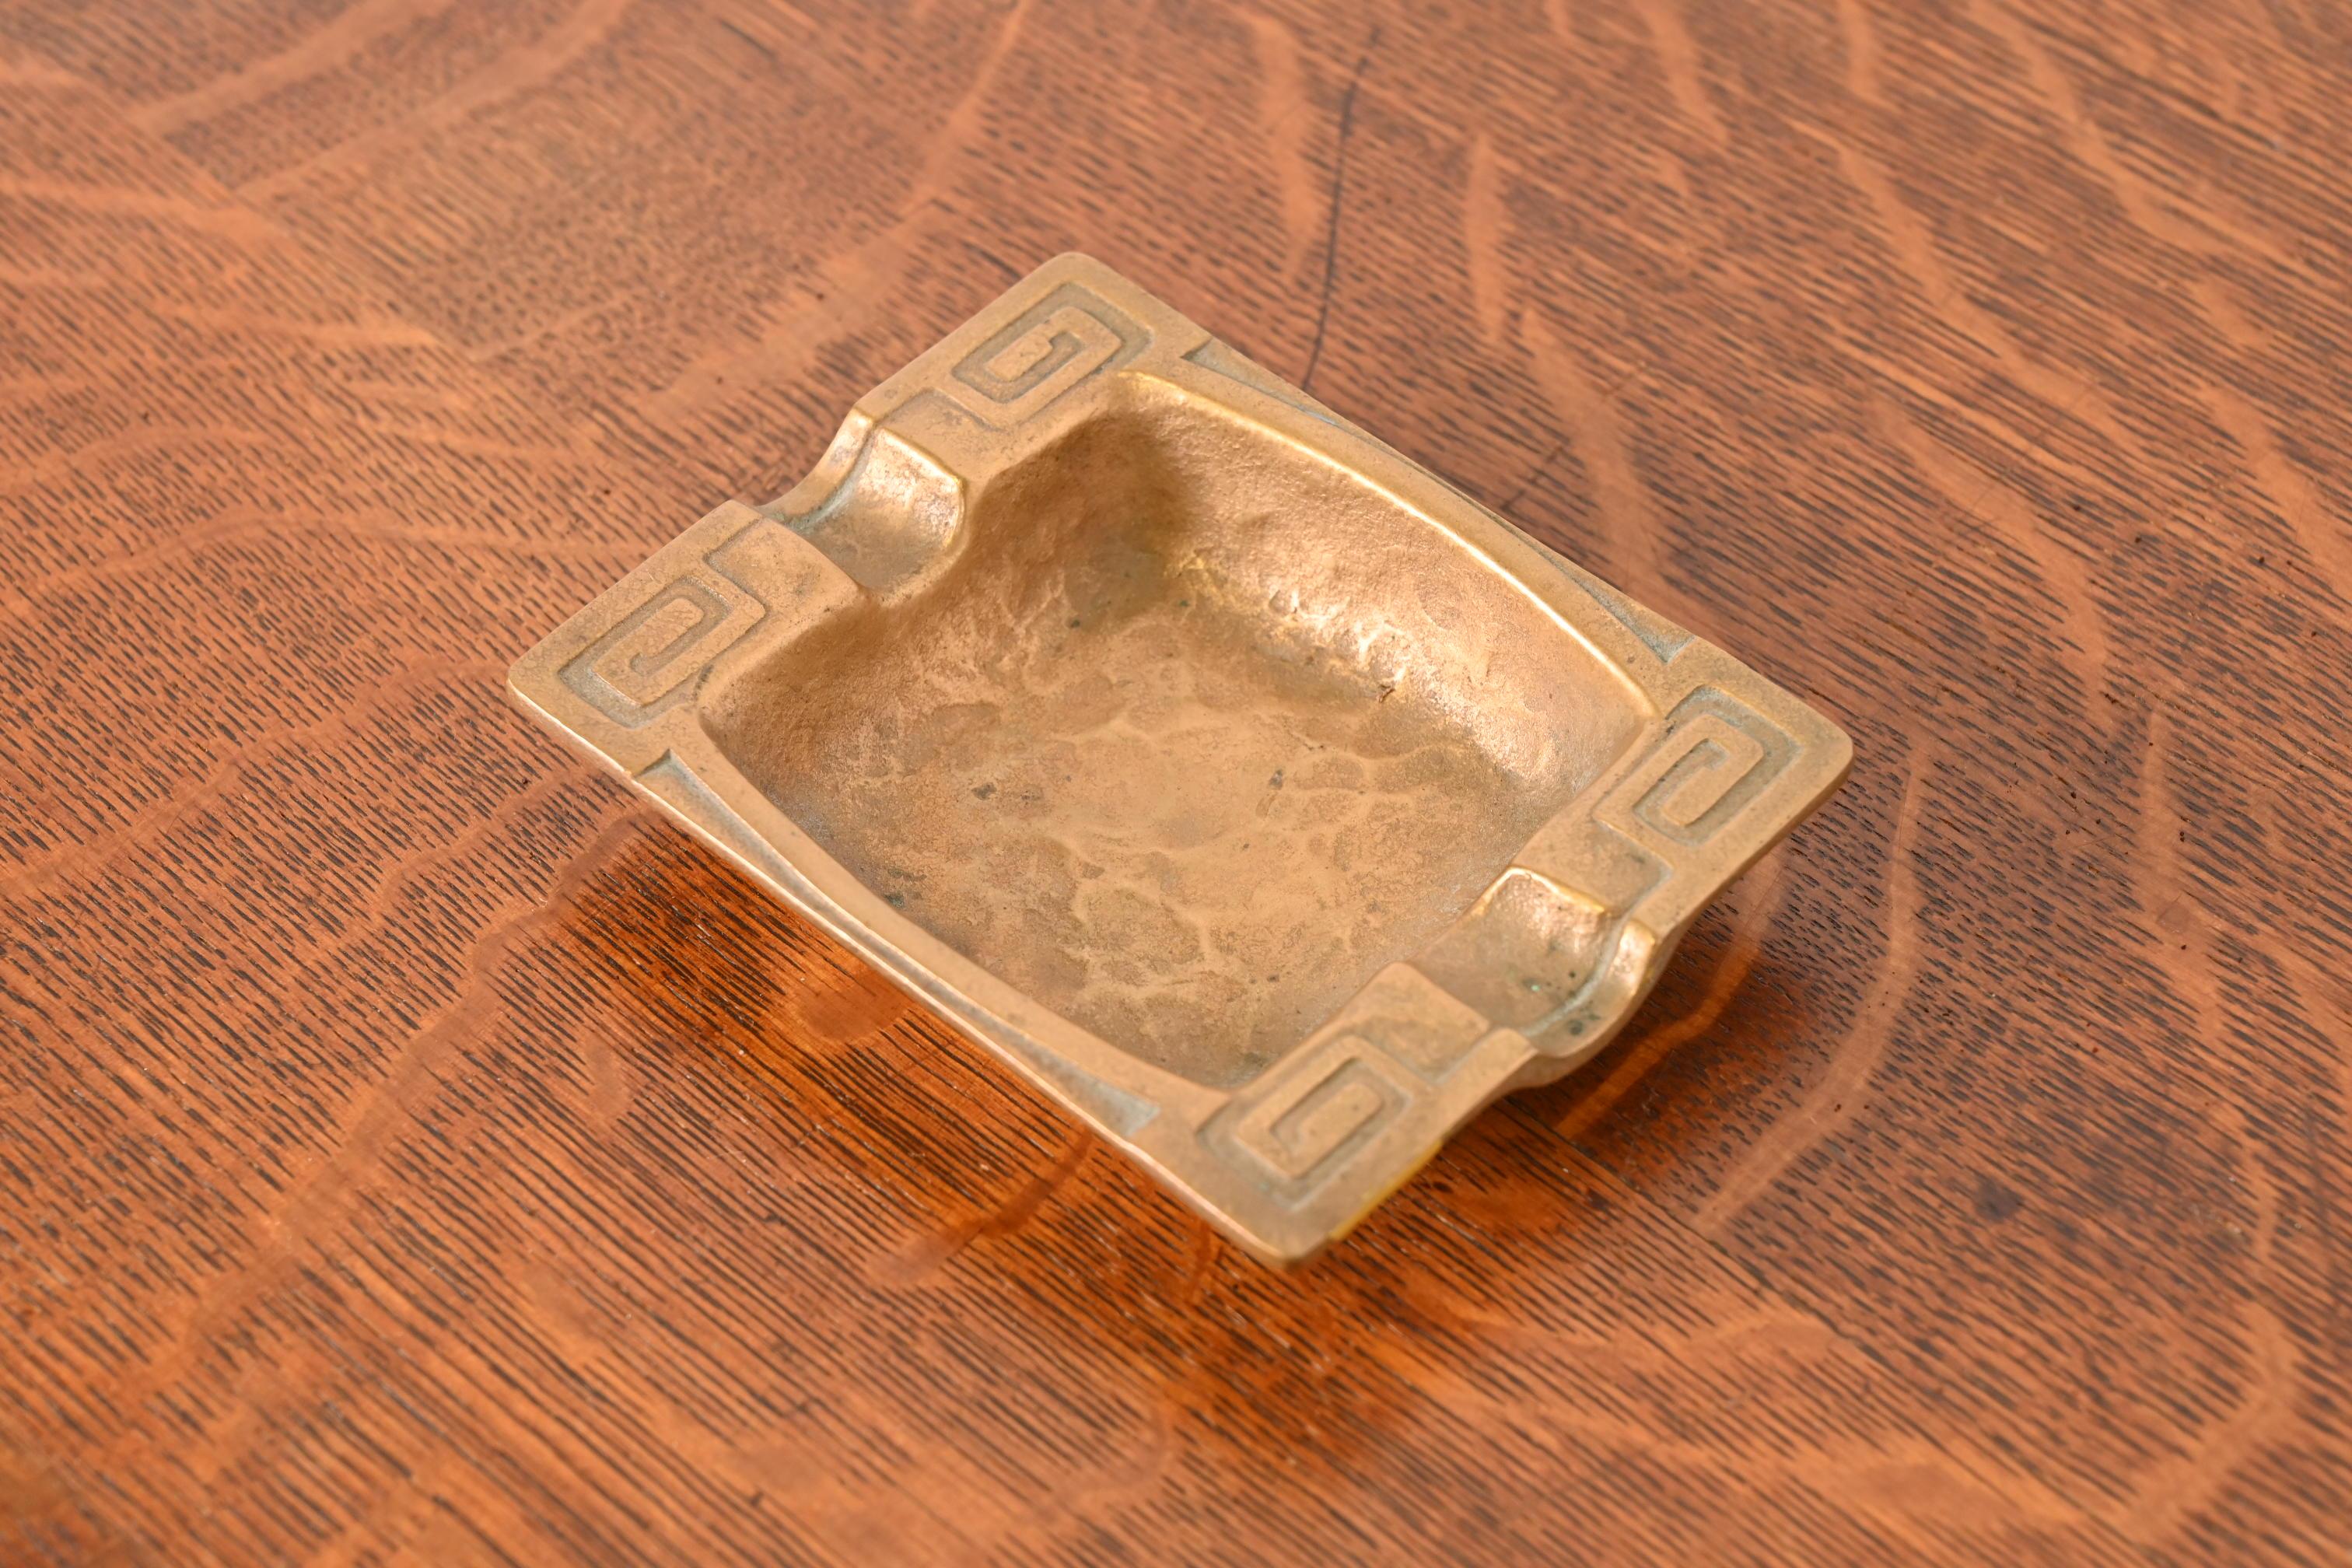 Tiffany Studios New York Greek Key Bronze Doré Ash Tray, Circa 1910 In Good Condition For Sale In South Bend, IN